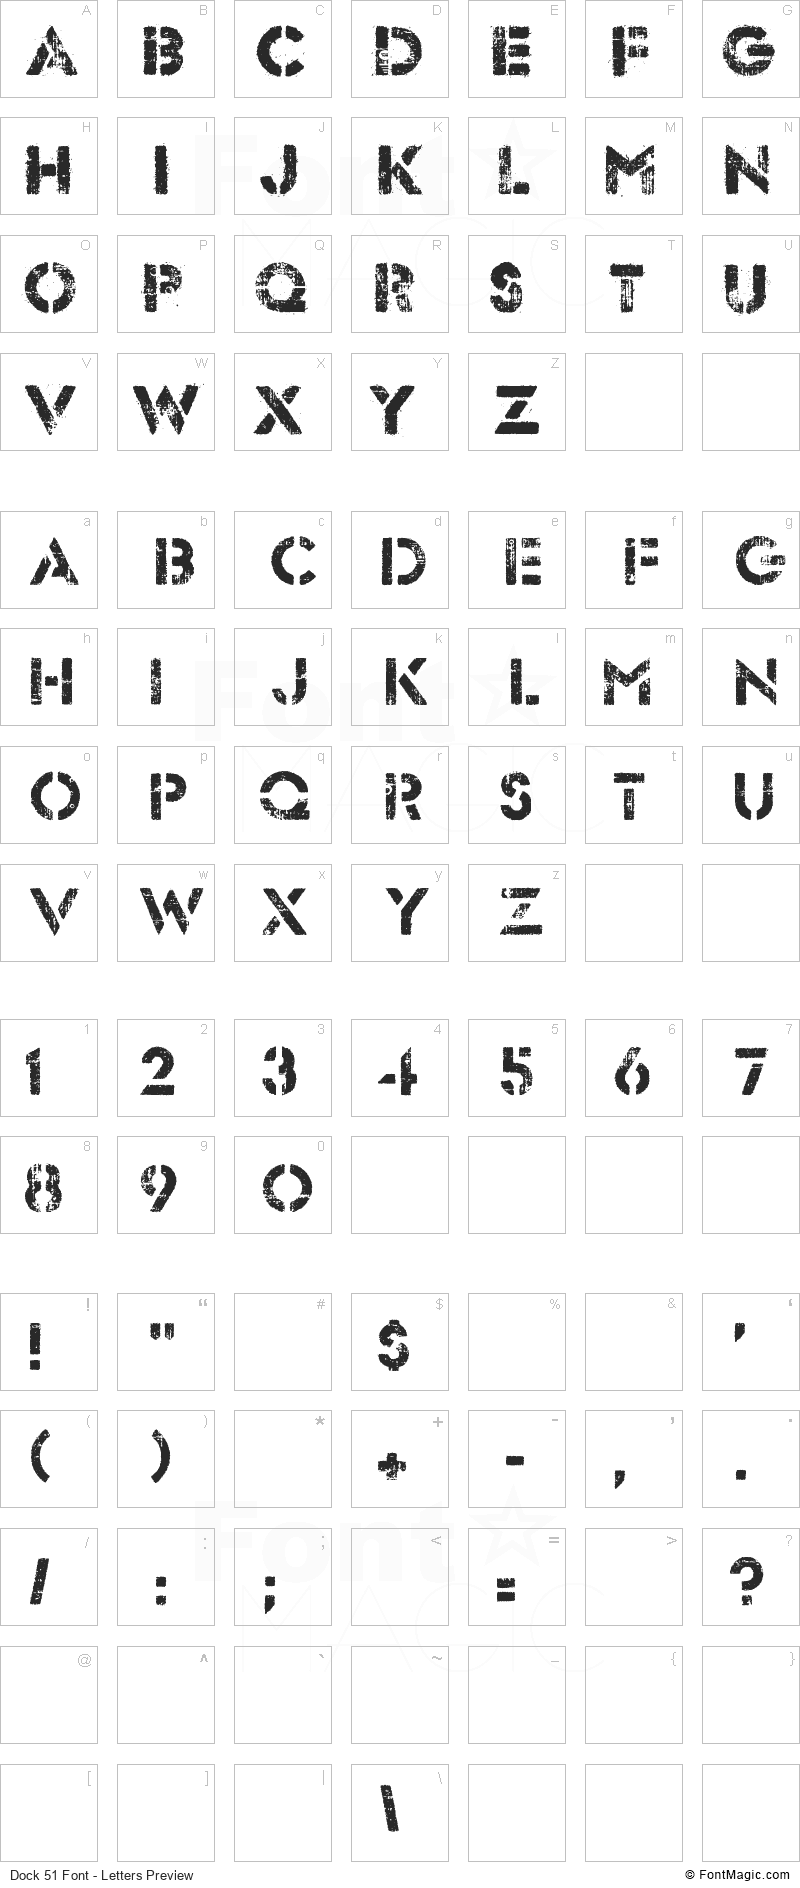 Dock 51 Font - All Latters Preview Chart